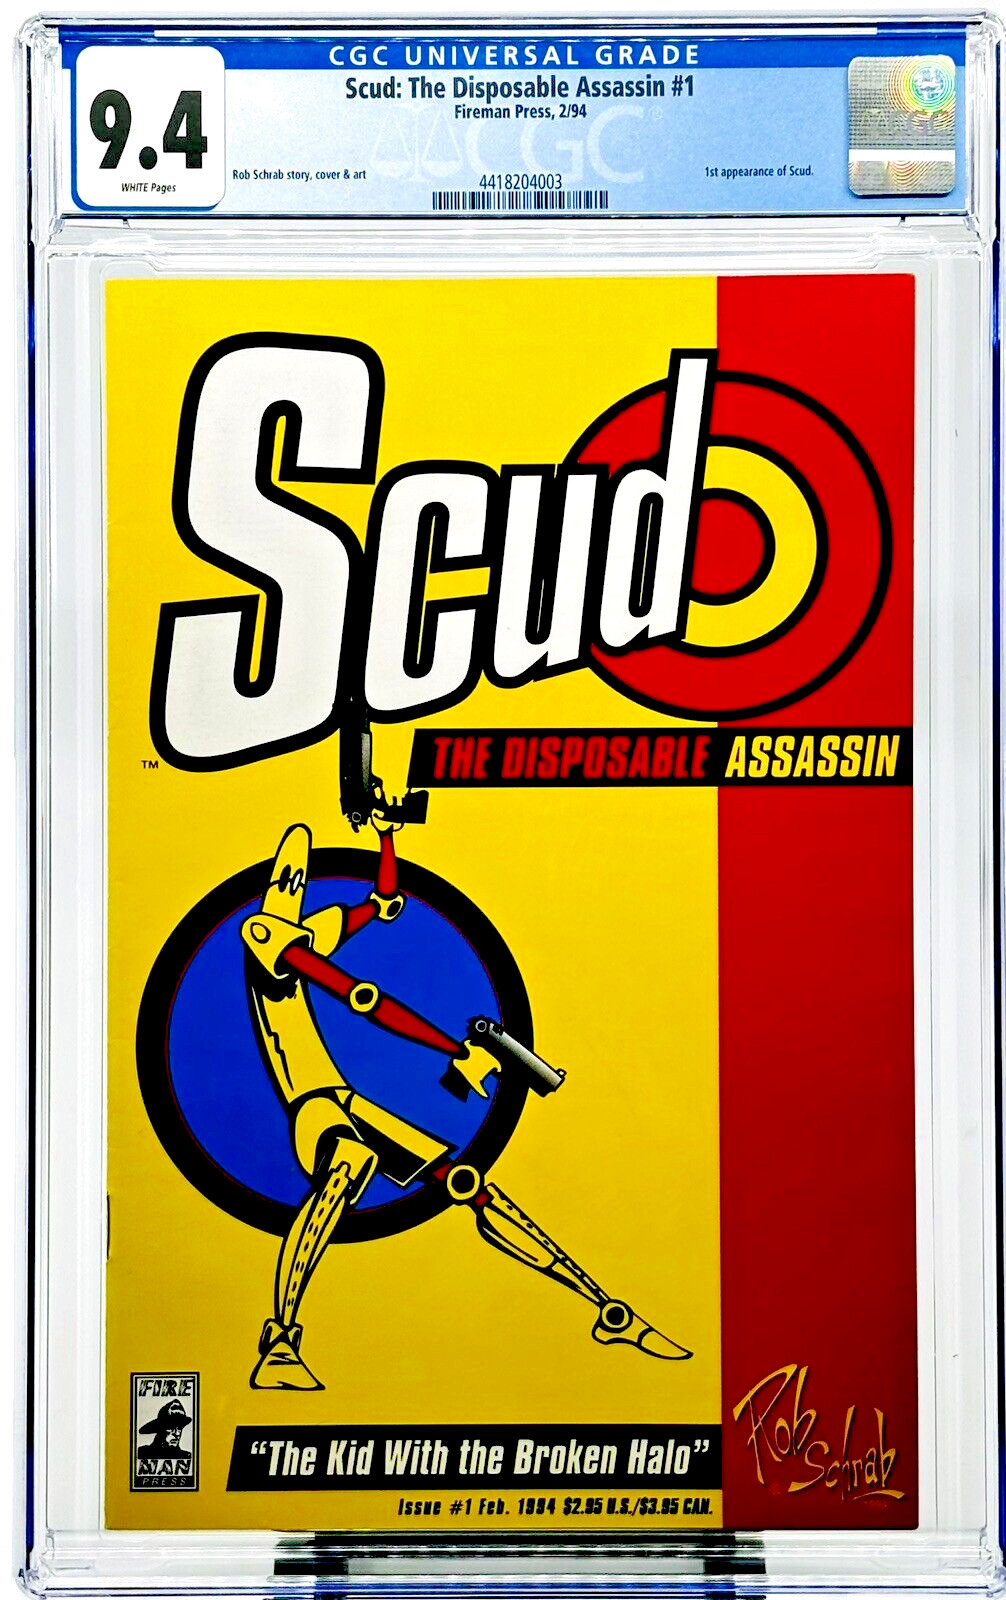 SCUD THE DISPOSABLE ASSASSIN #1 CGC 9.4 WHITE PAGES FIREMAN PRESS 1994 1st Print